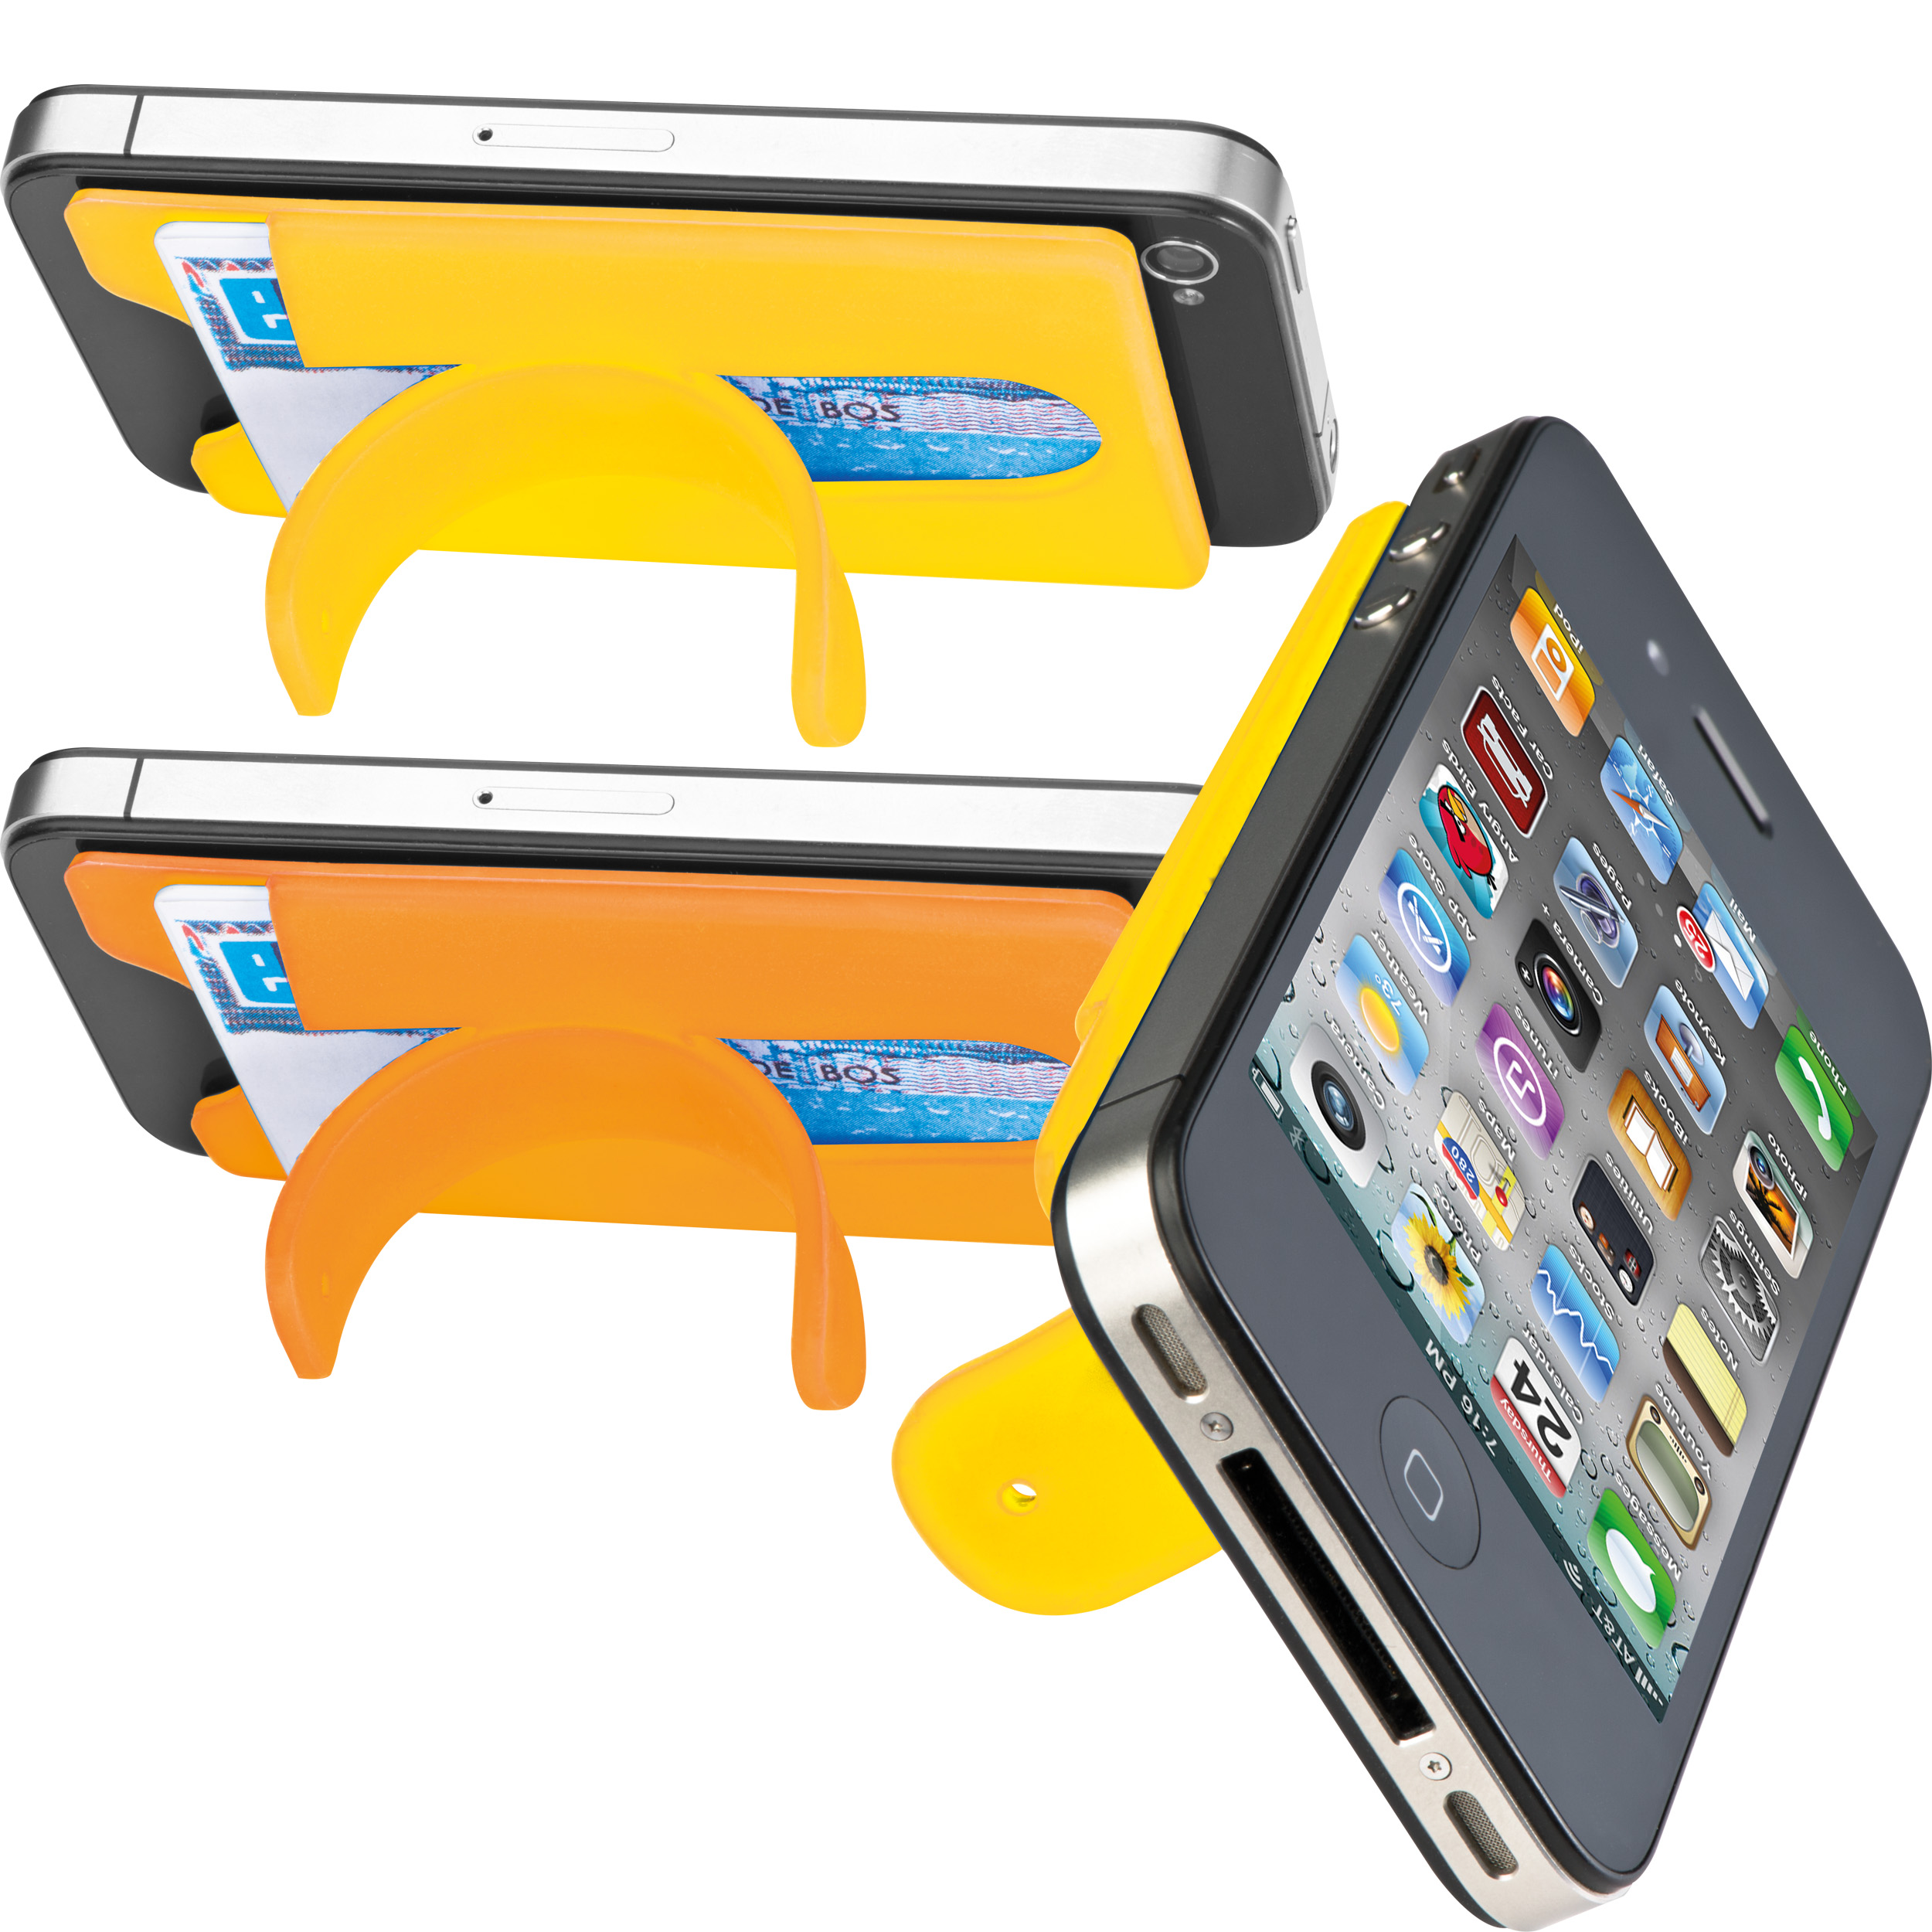 smartphone wallet with integrated stand